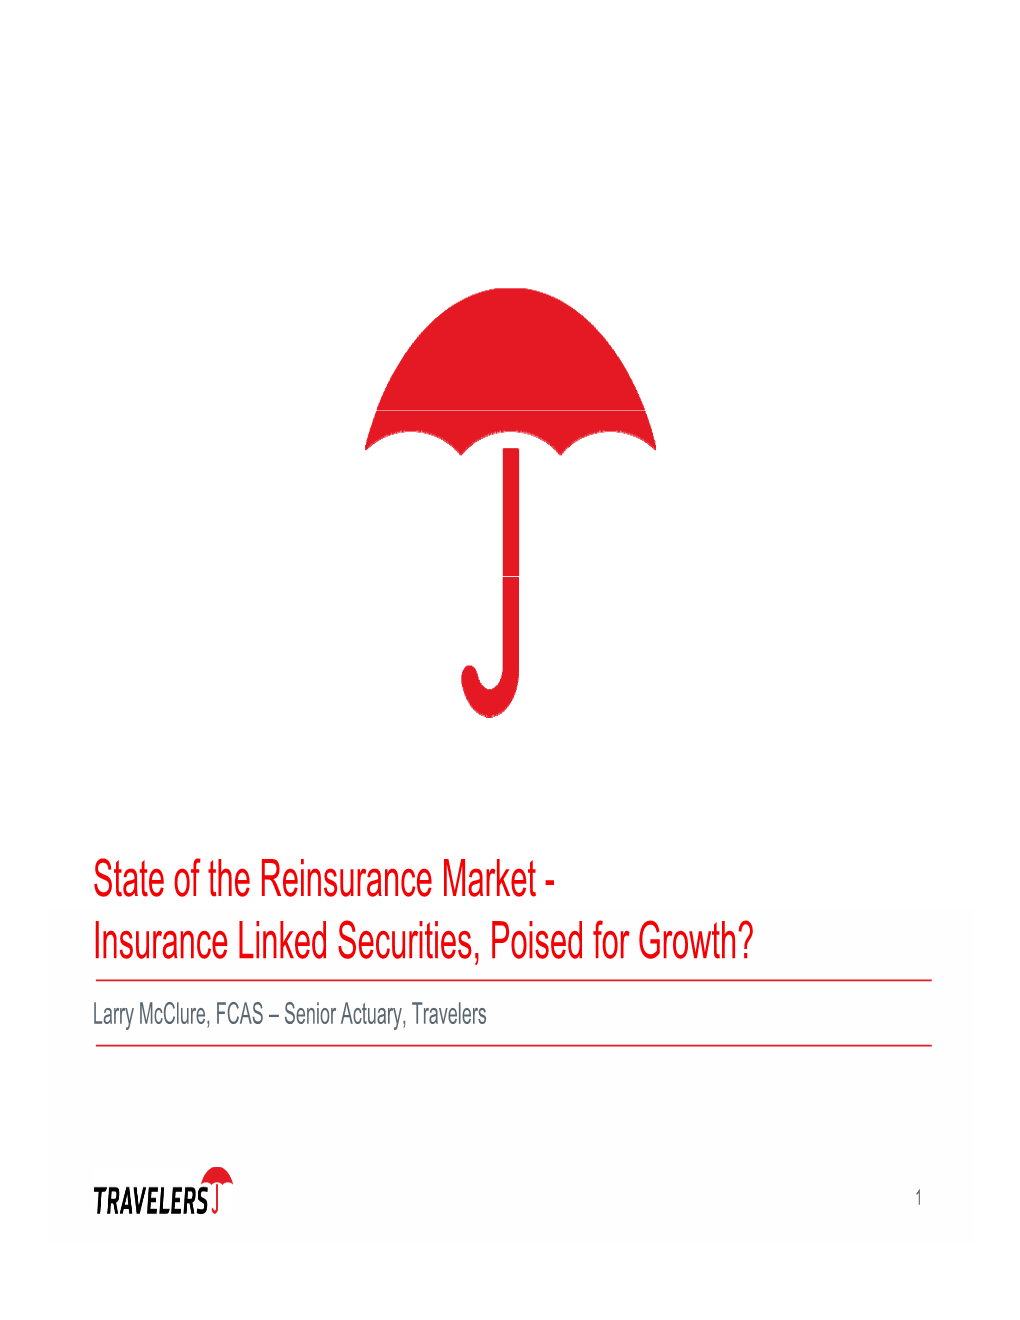 Insurance Linked Securities, Poised for Growth?